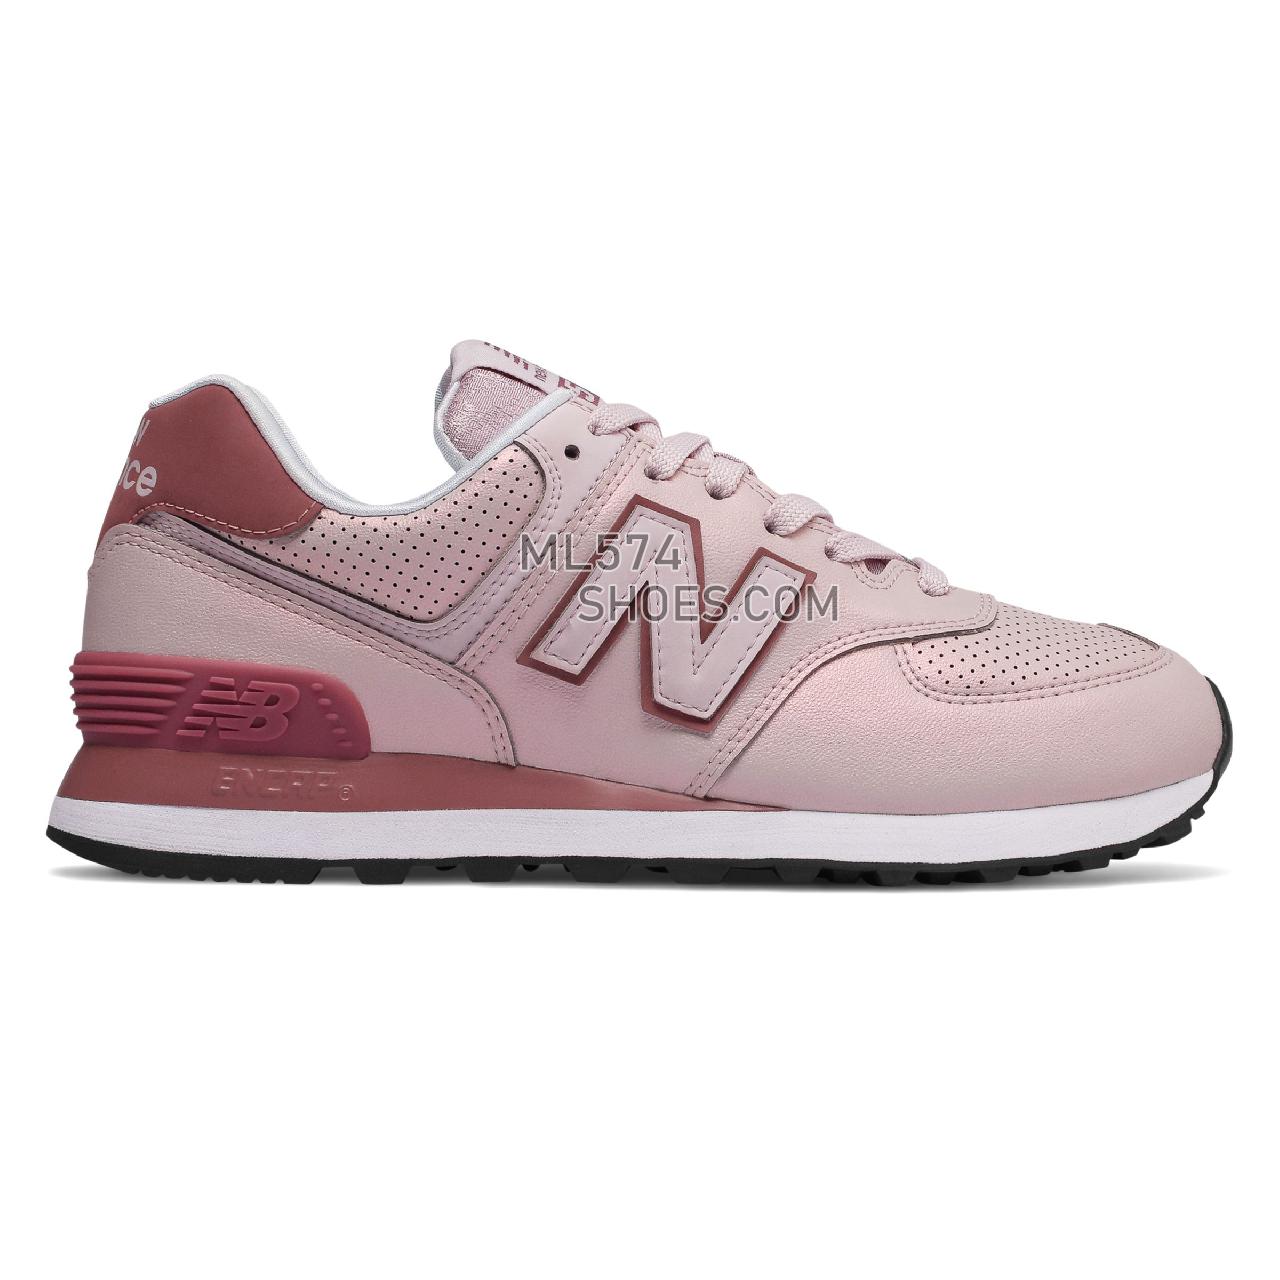 New Balance 574 Sheen Pack - Women's 574 - Classic Conch Shell with Dark Oxide - WL574KSE